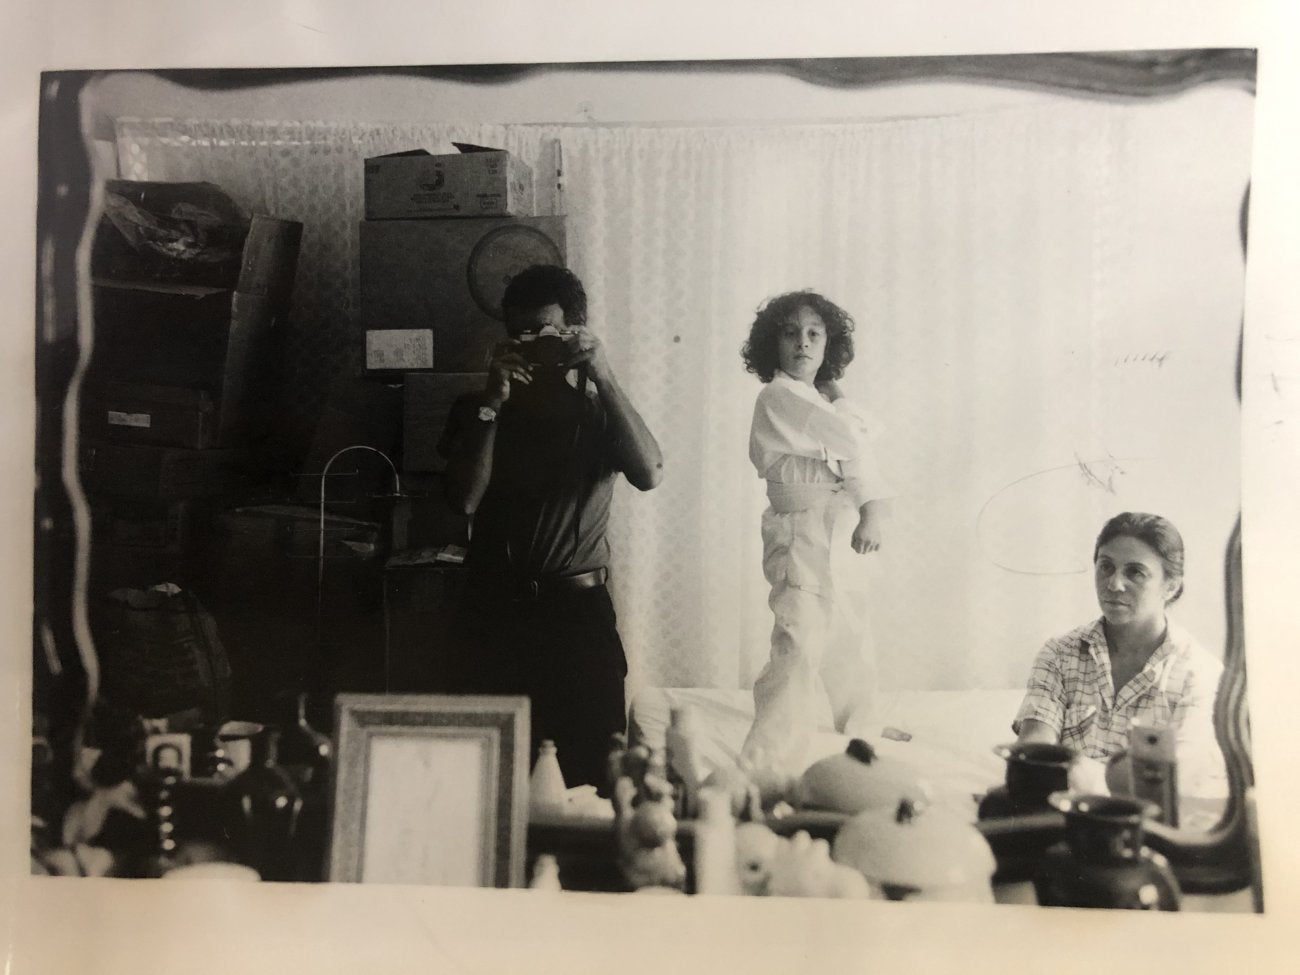 A B&W archival shot of a male figure in a photography studio taking self-portrait in a mirror, with a woman posing in the background.